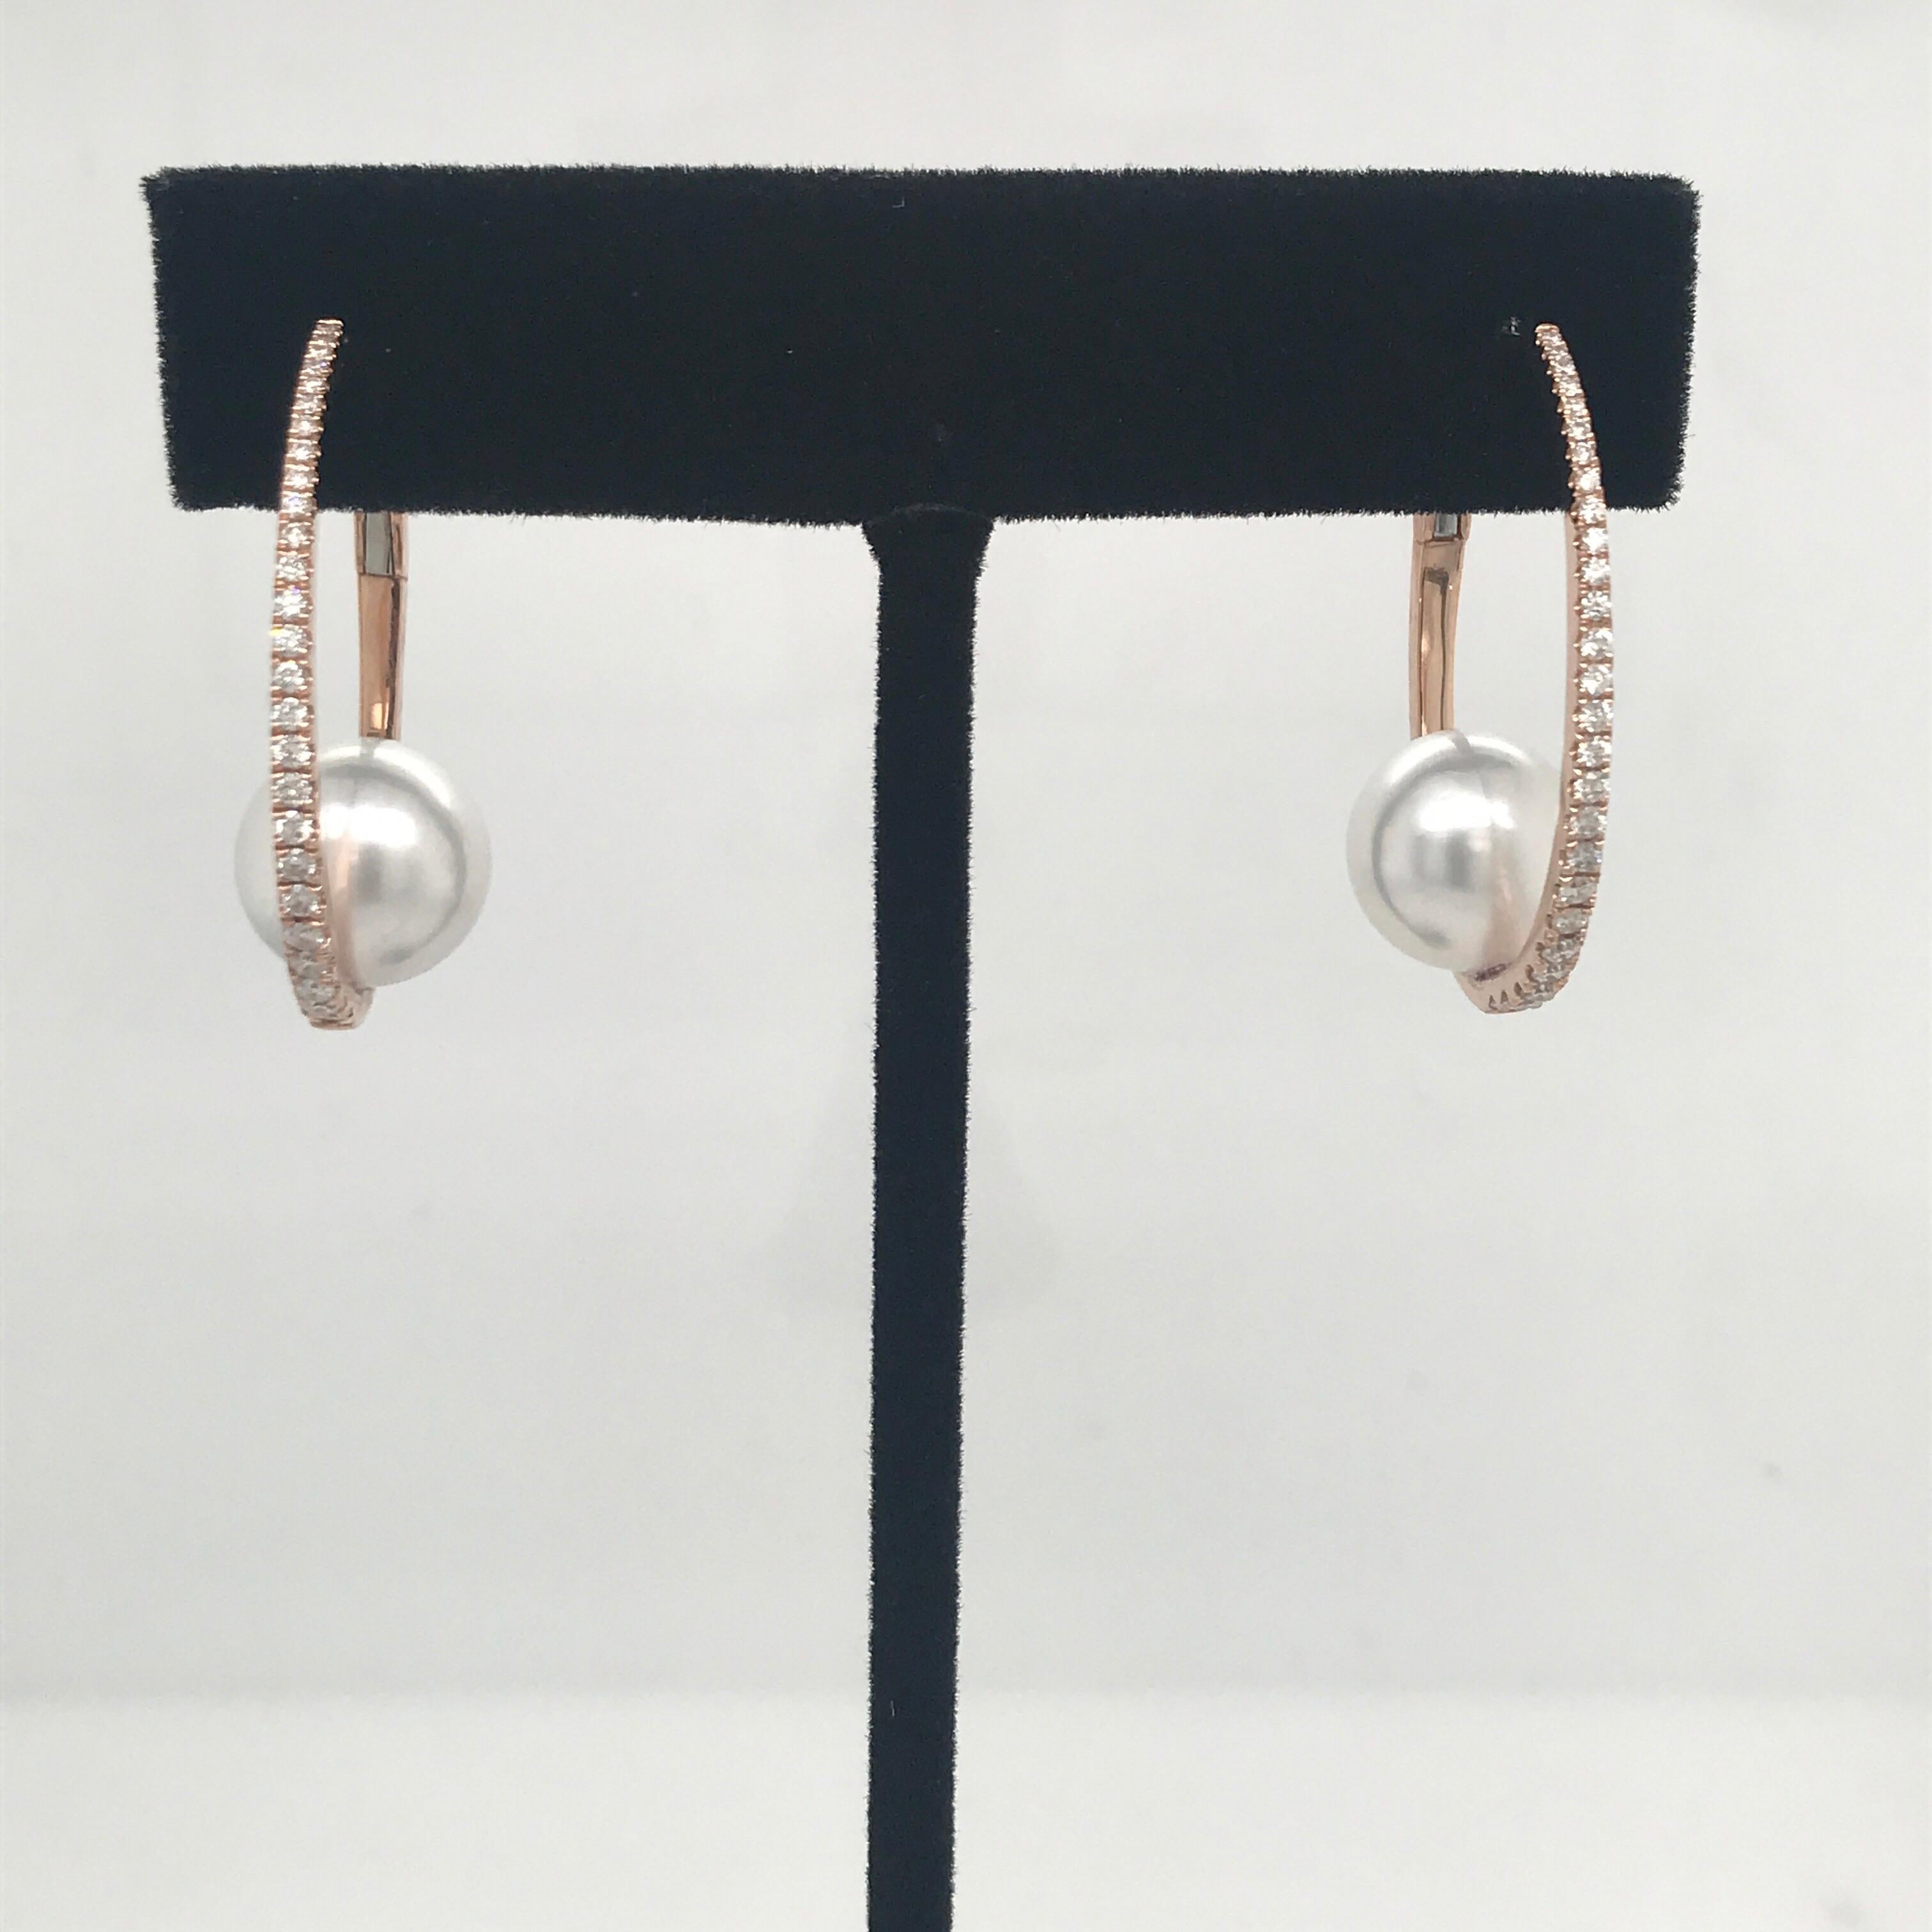 18K Rose Gold diamond hoop earrings weighing 0.55 carats with a 10-11 mm White South Sea Pearl. 
Available in all gold & pearl colors. 